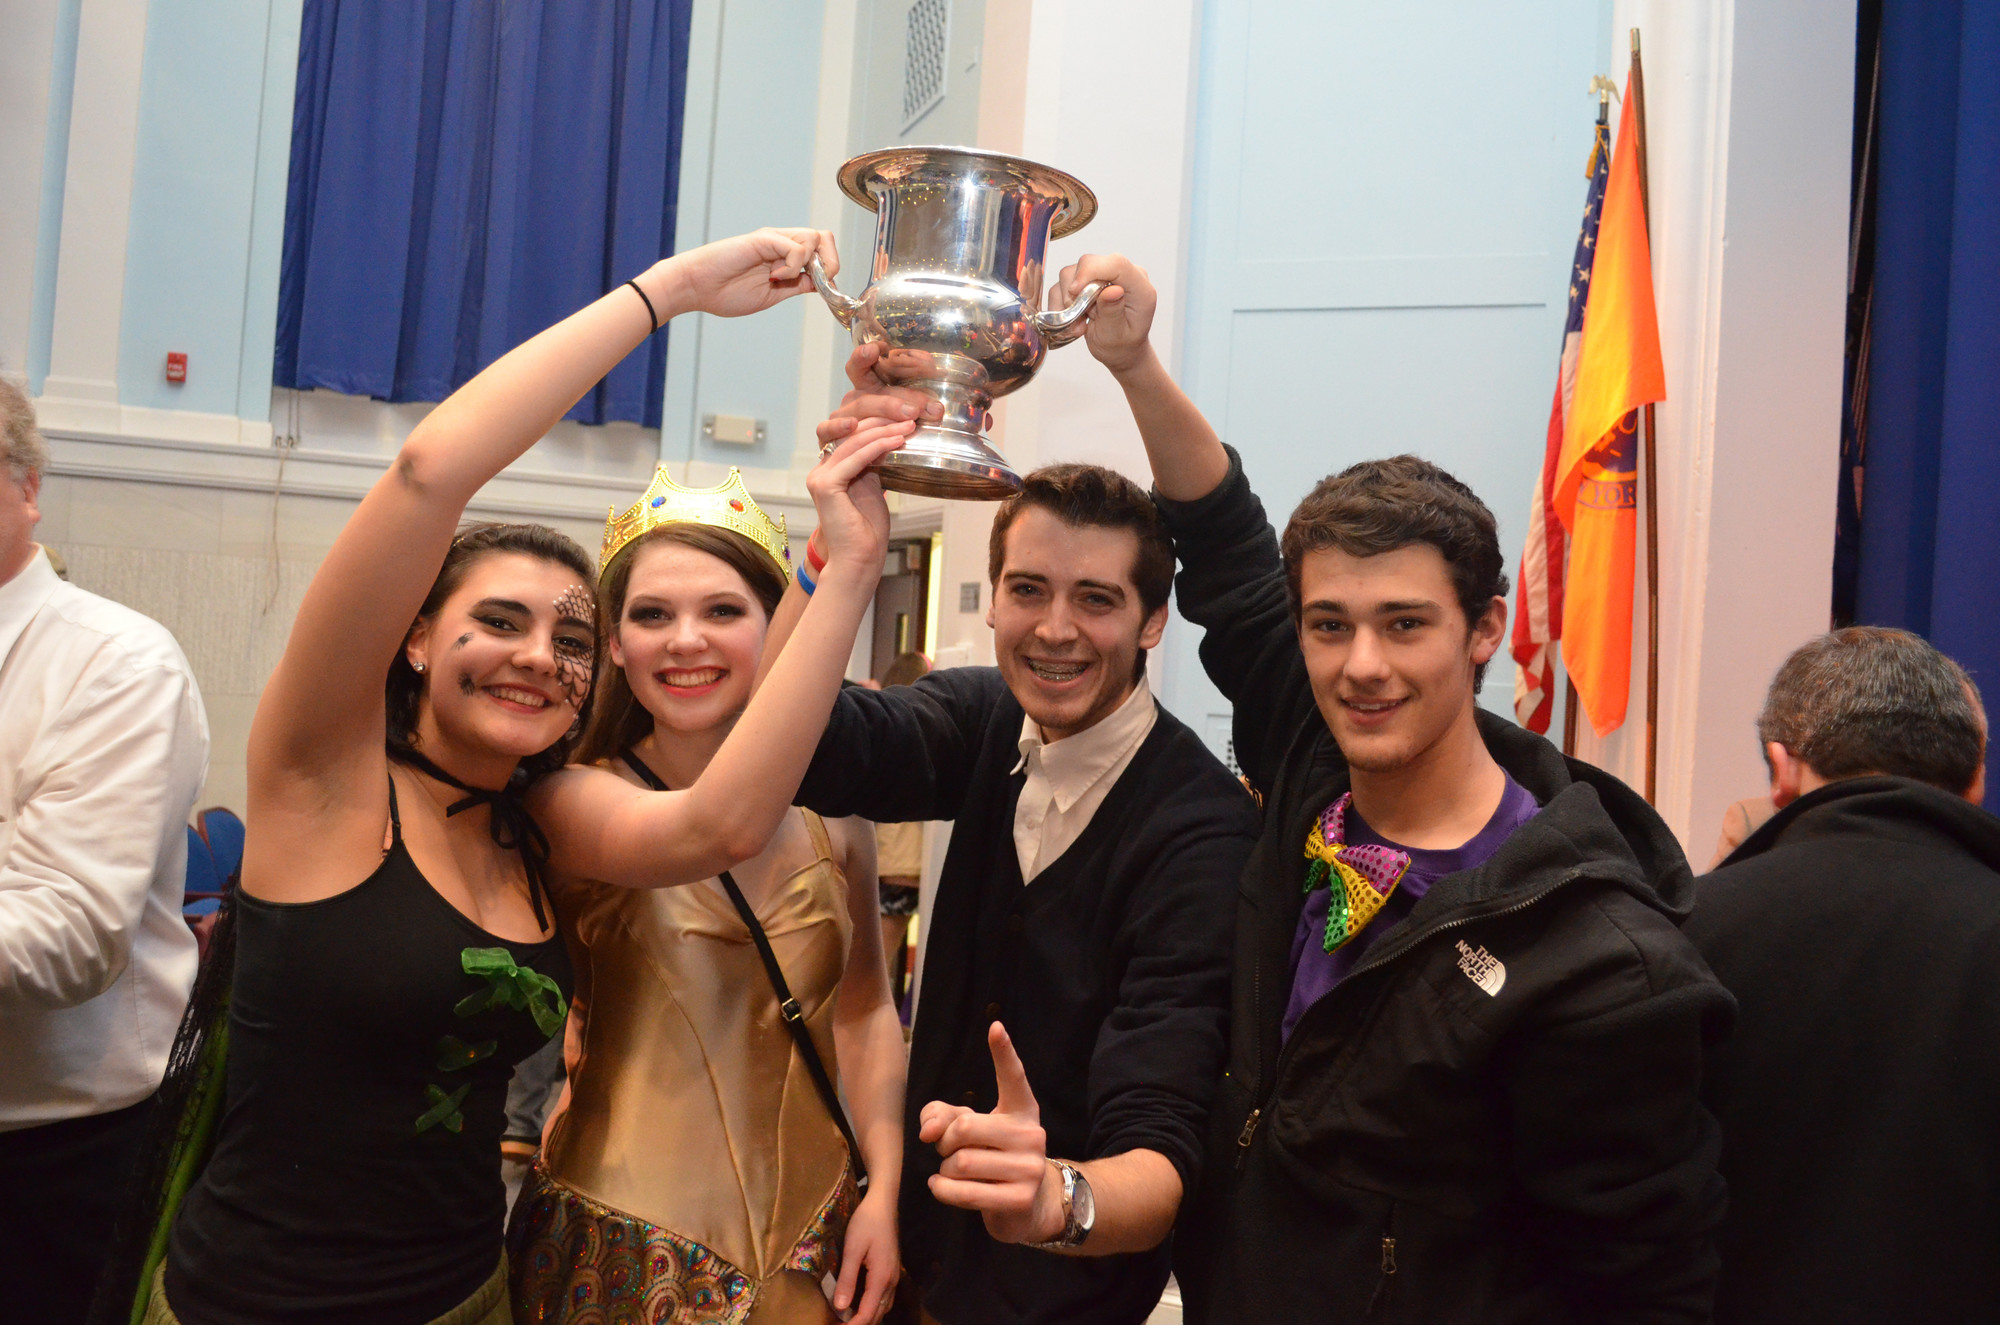 Members of the senior class proudly displayed the Silver Cup after last year’s win.